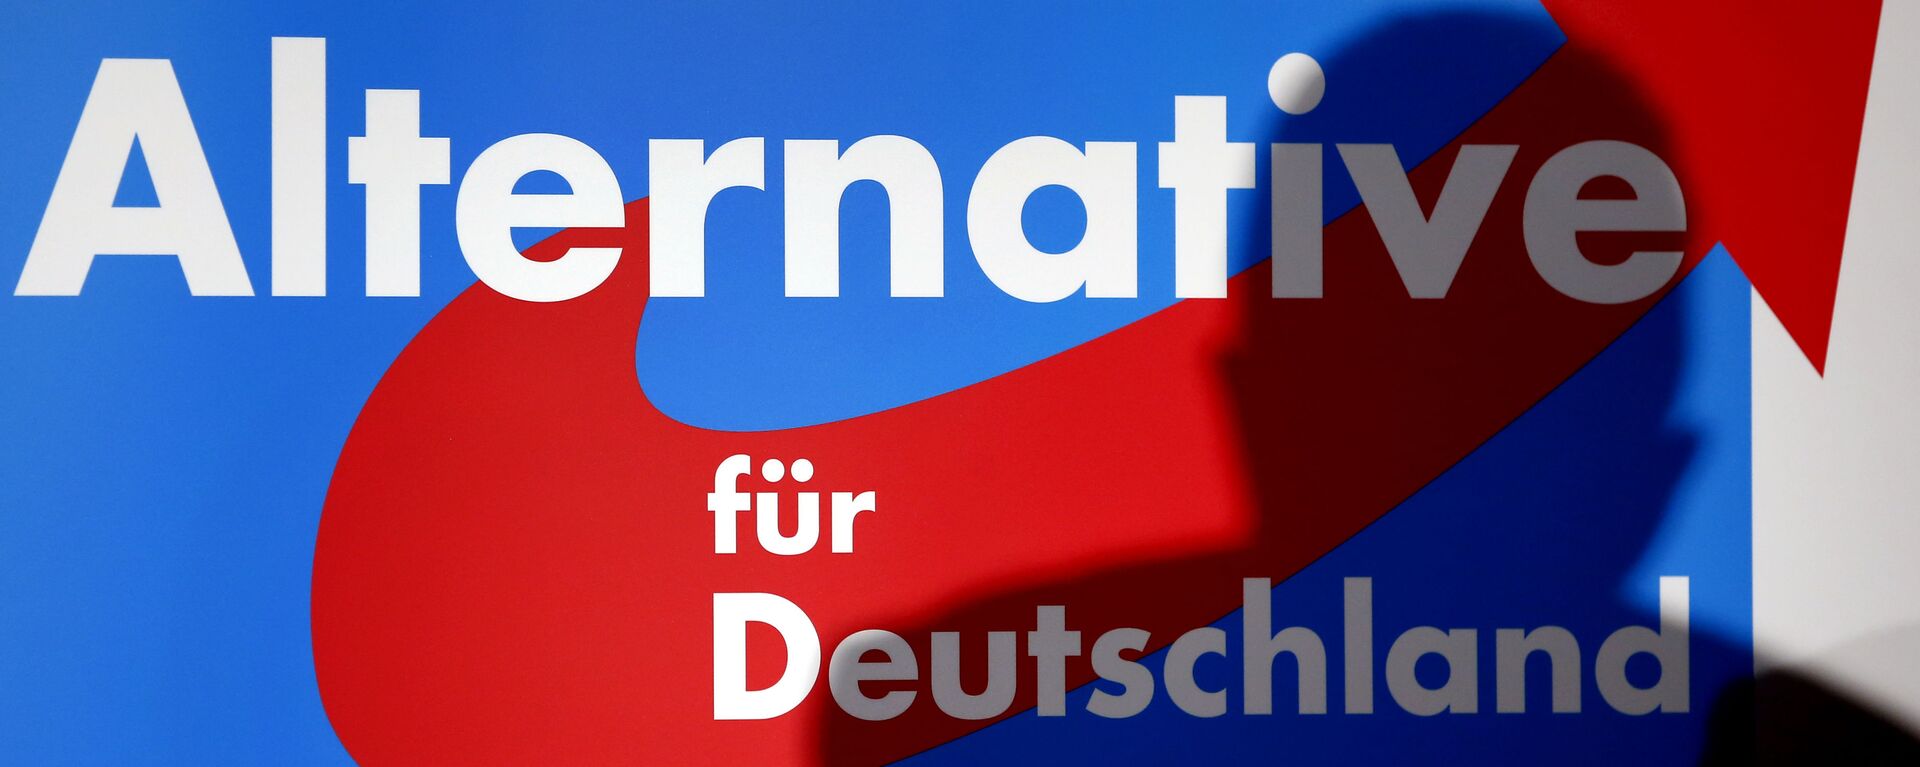 The shadow of the founder of the new German party 'Alternative fuer Deutschland' (Alternative for Germany), Bernd Lucke, is seen in on a logo during the party's founding convention in Berlin, Germany, Sunday, April 14, 2013 - Sputnik International, 1920, 01.06.2021